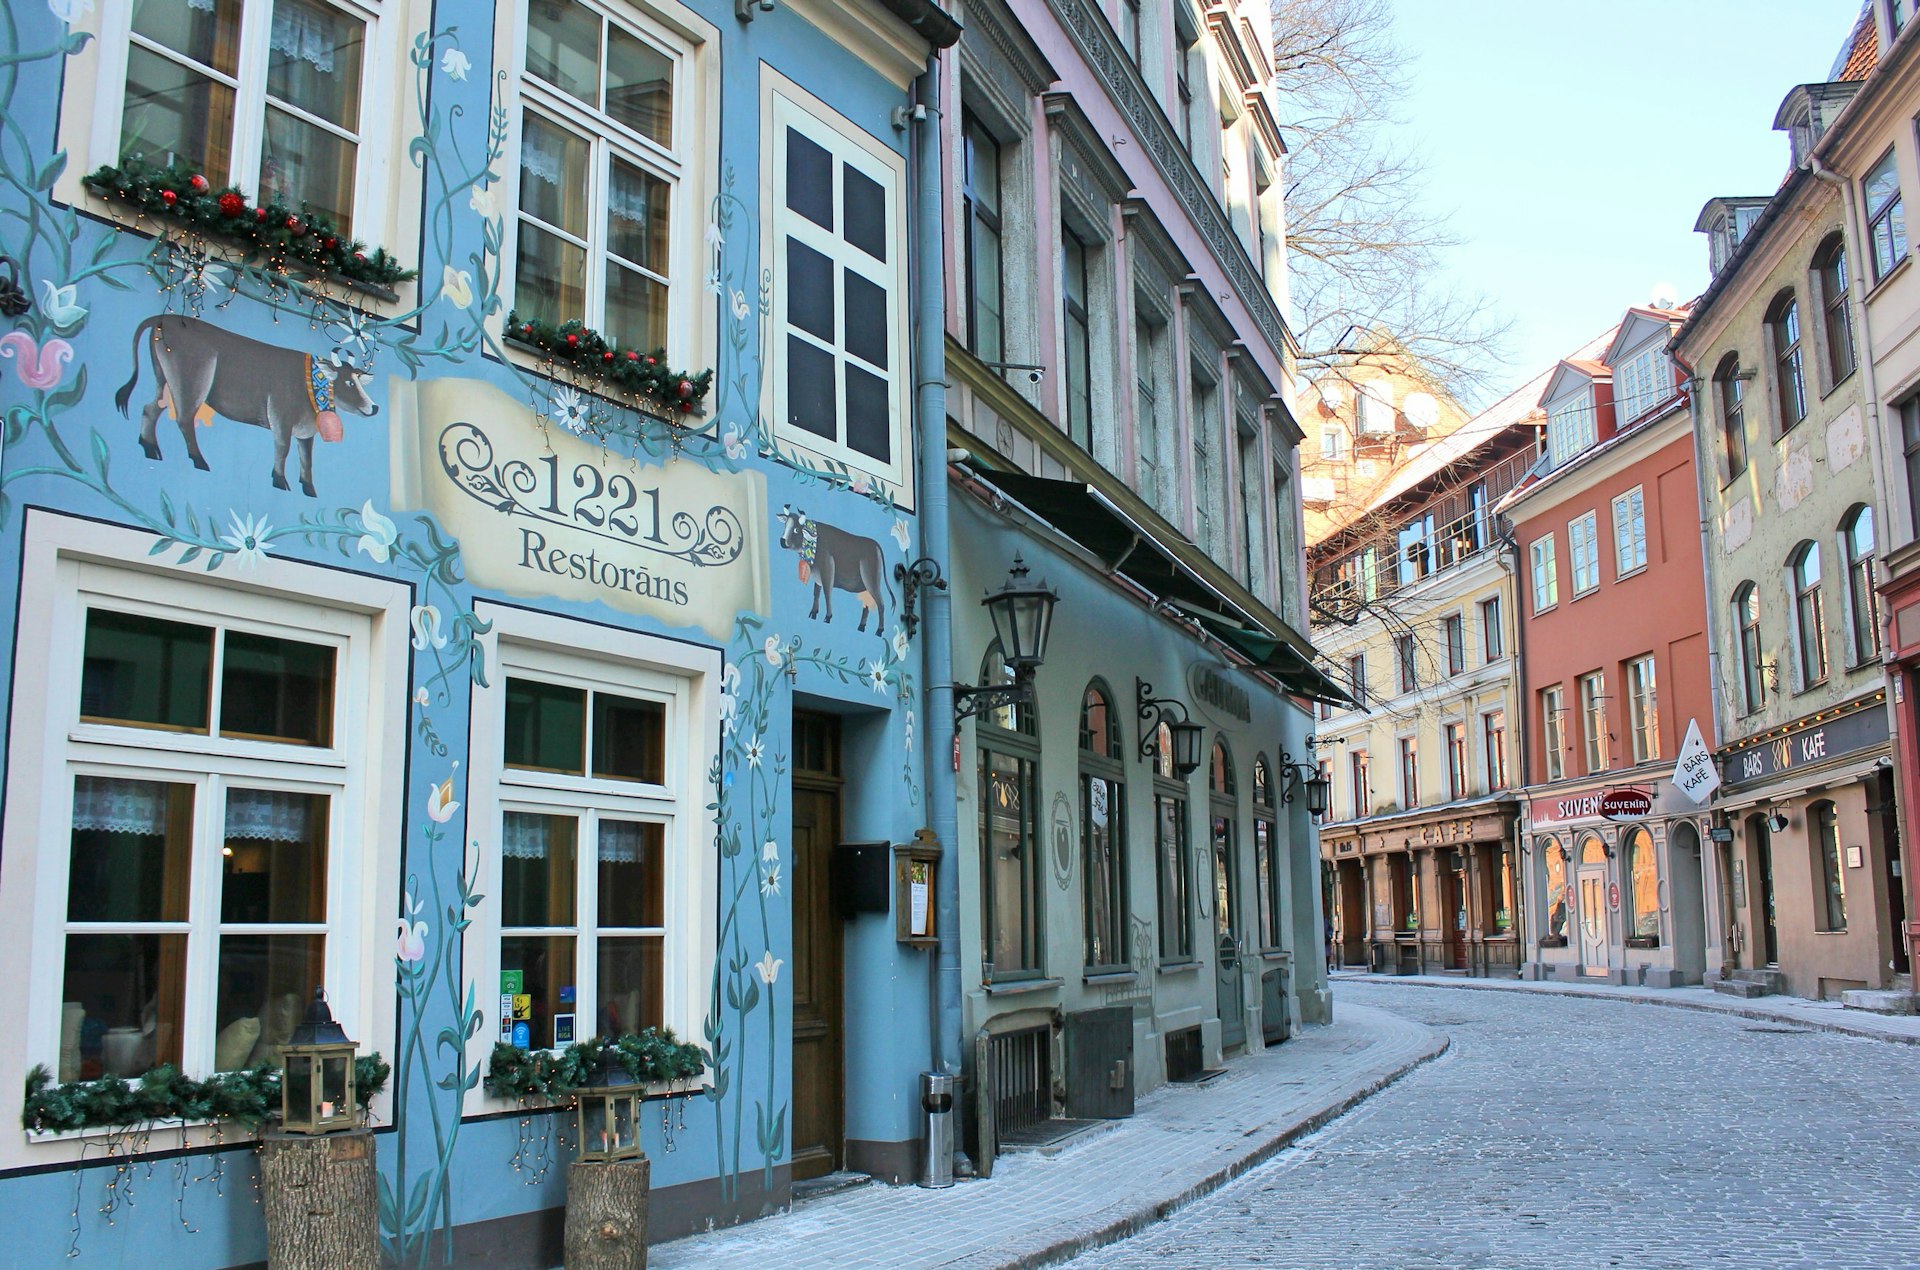 View of the colourful facades of the buildings of pretty Jauniela St, Rīga, which is a winding, cobblestone lane © Caroline Hadamitzky / Lonely Planet